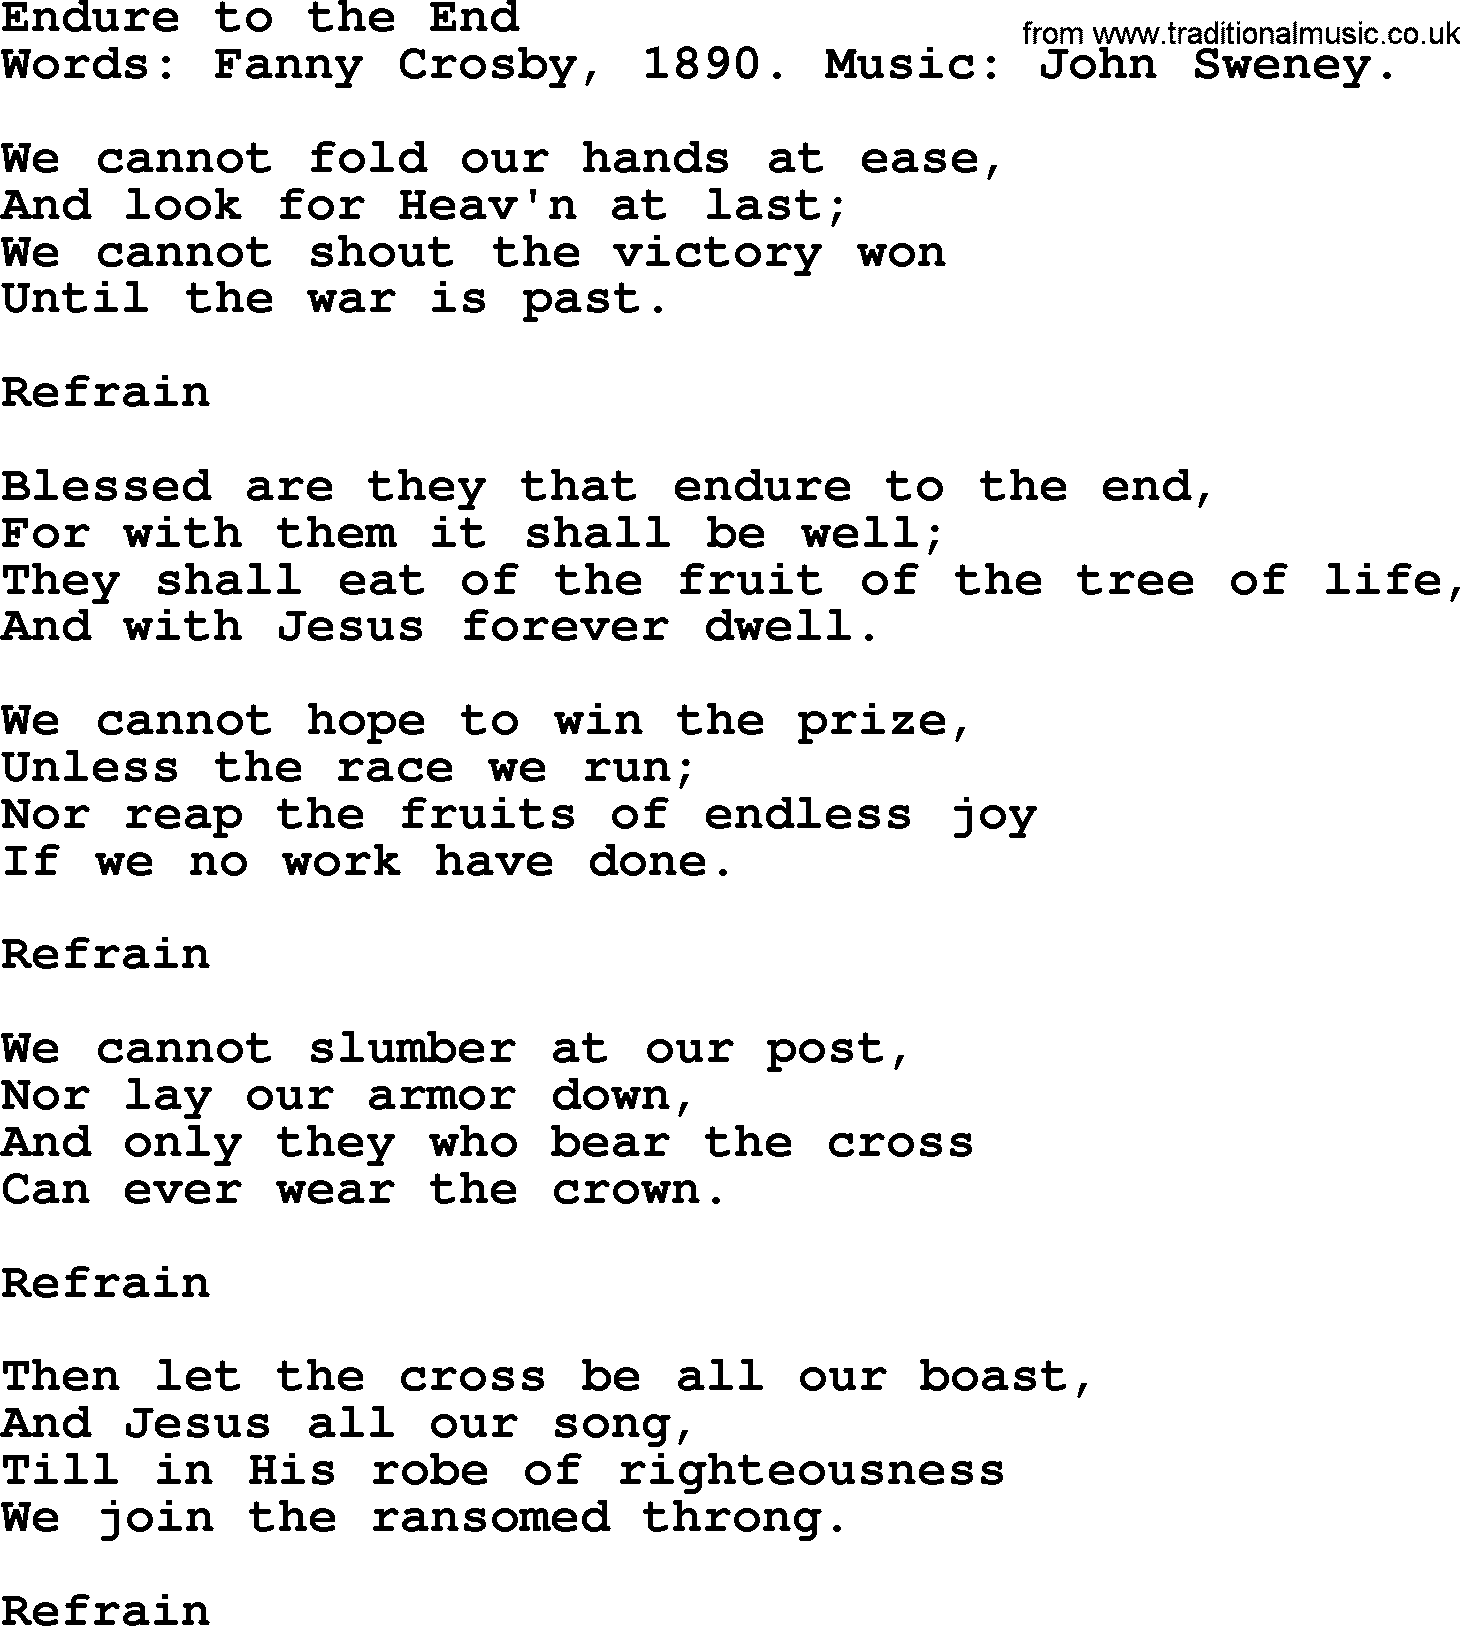 Fanny Crosby song: Endure To The End, lyrics